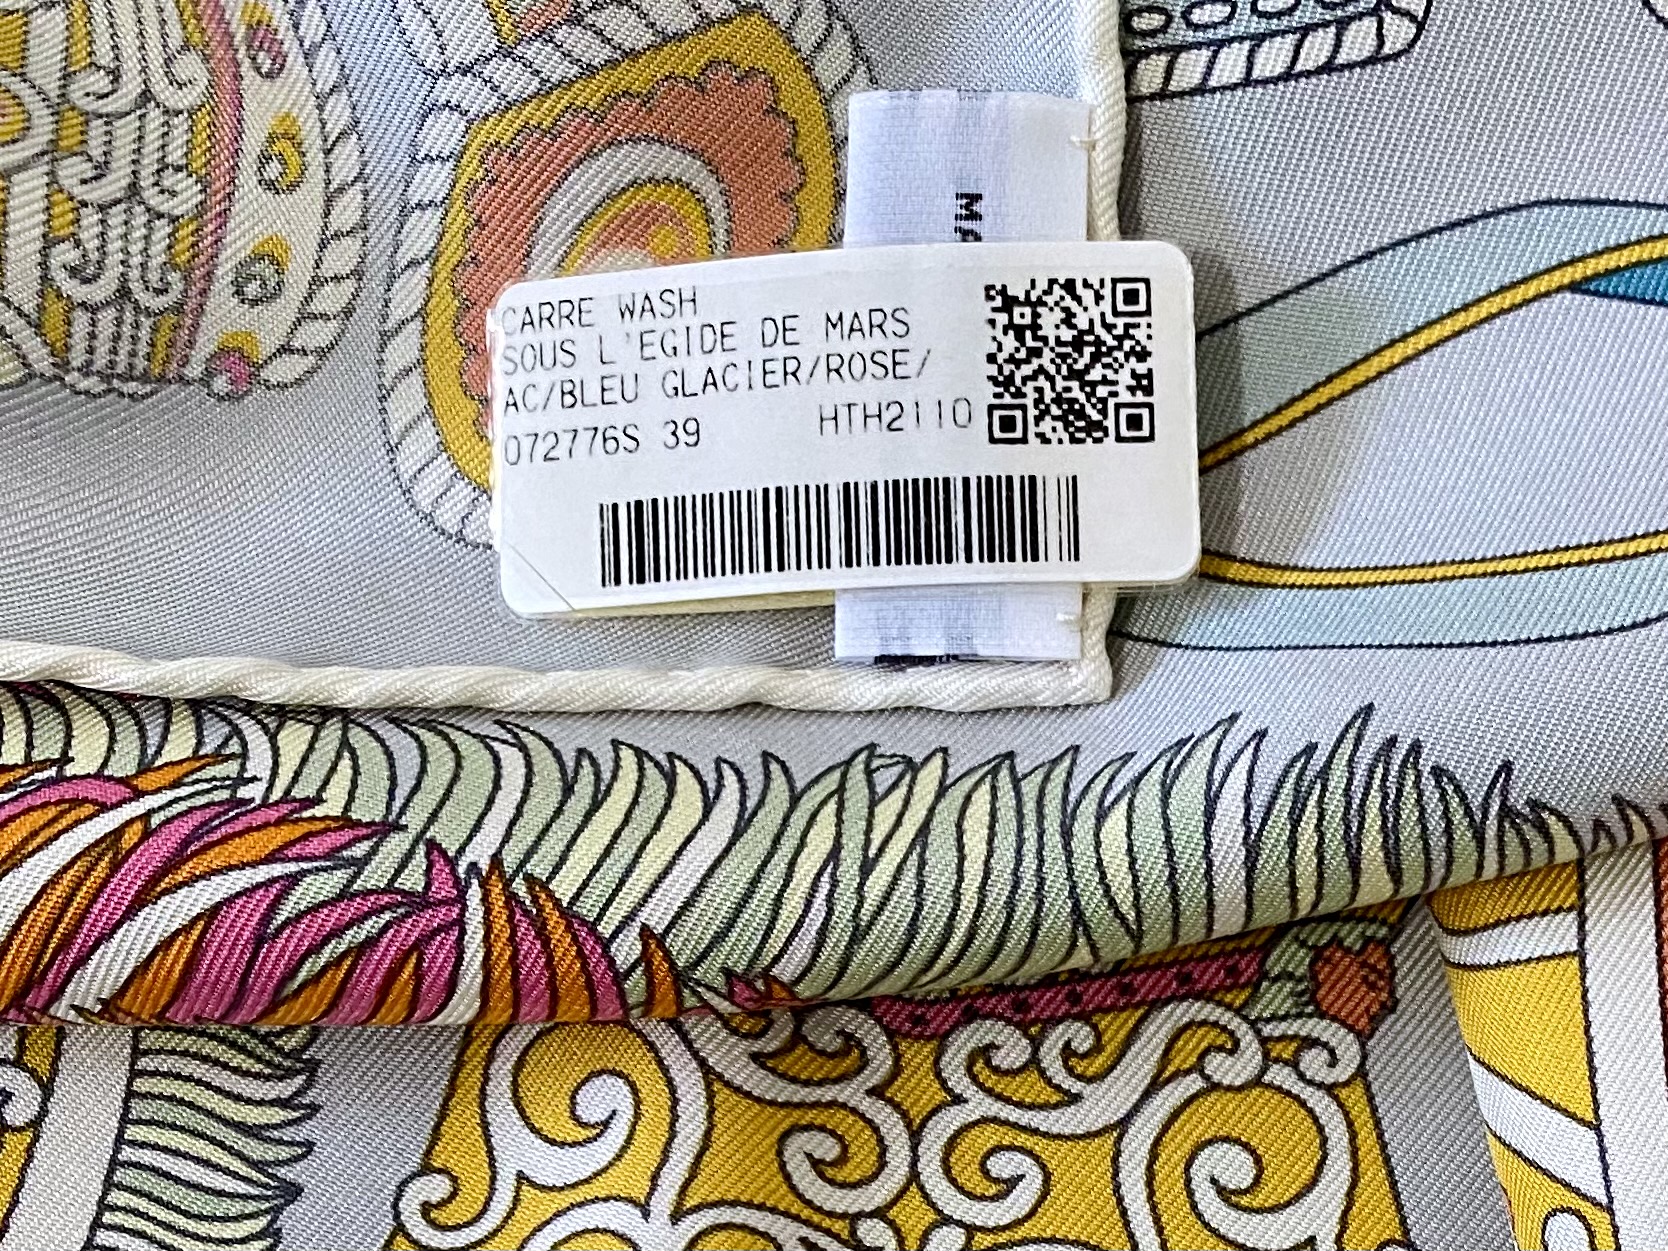 A plastic "store tag" (over the care tag) showing the colorway number and colors. Photo via @The_Notorious_Pink